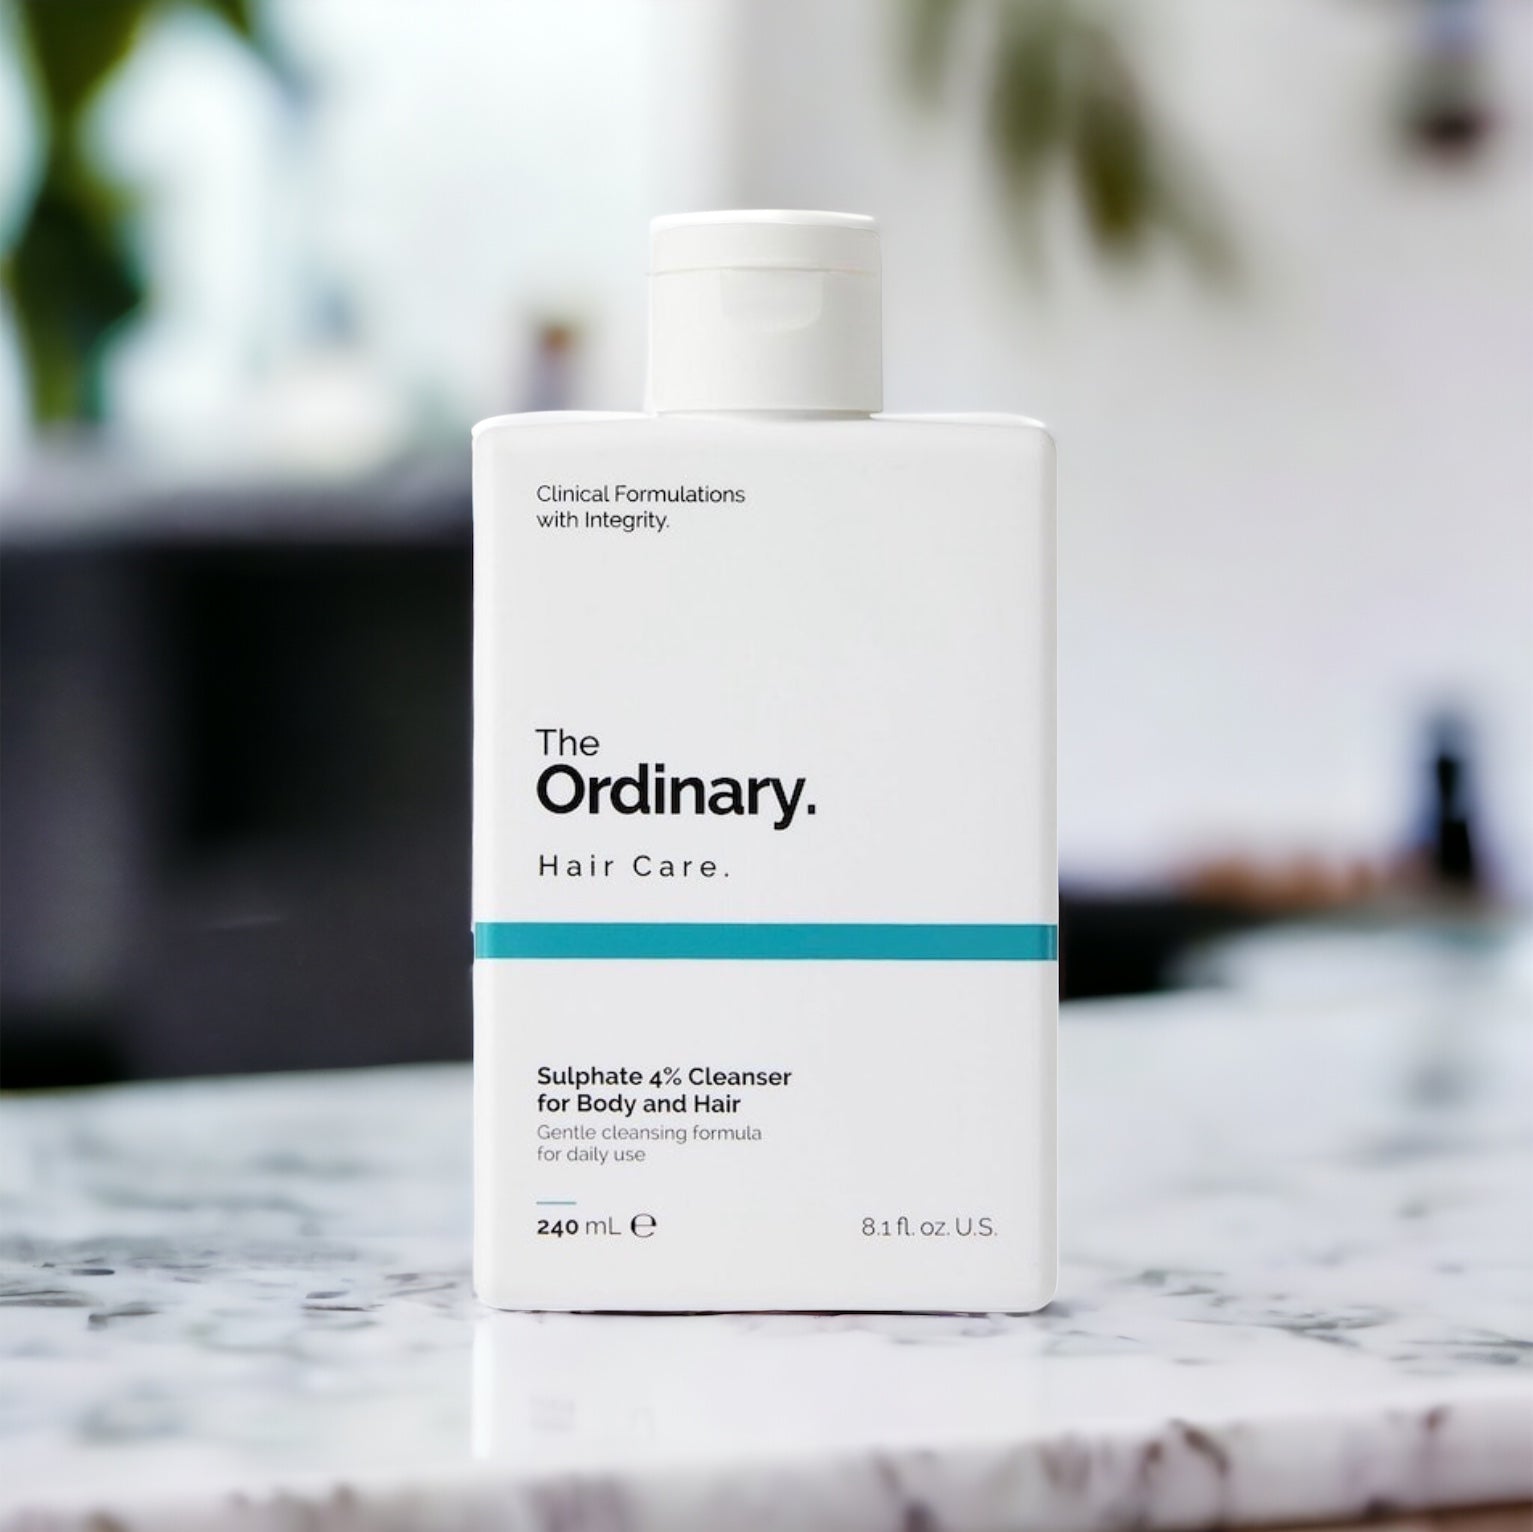 THE ORDINARY HAIR CARE SULPHATE 4% CLEANSER FOR BODY AND HAIR